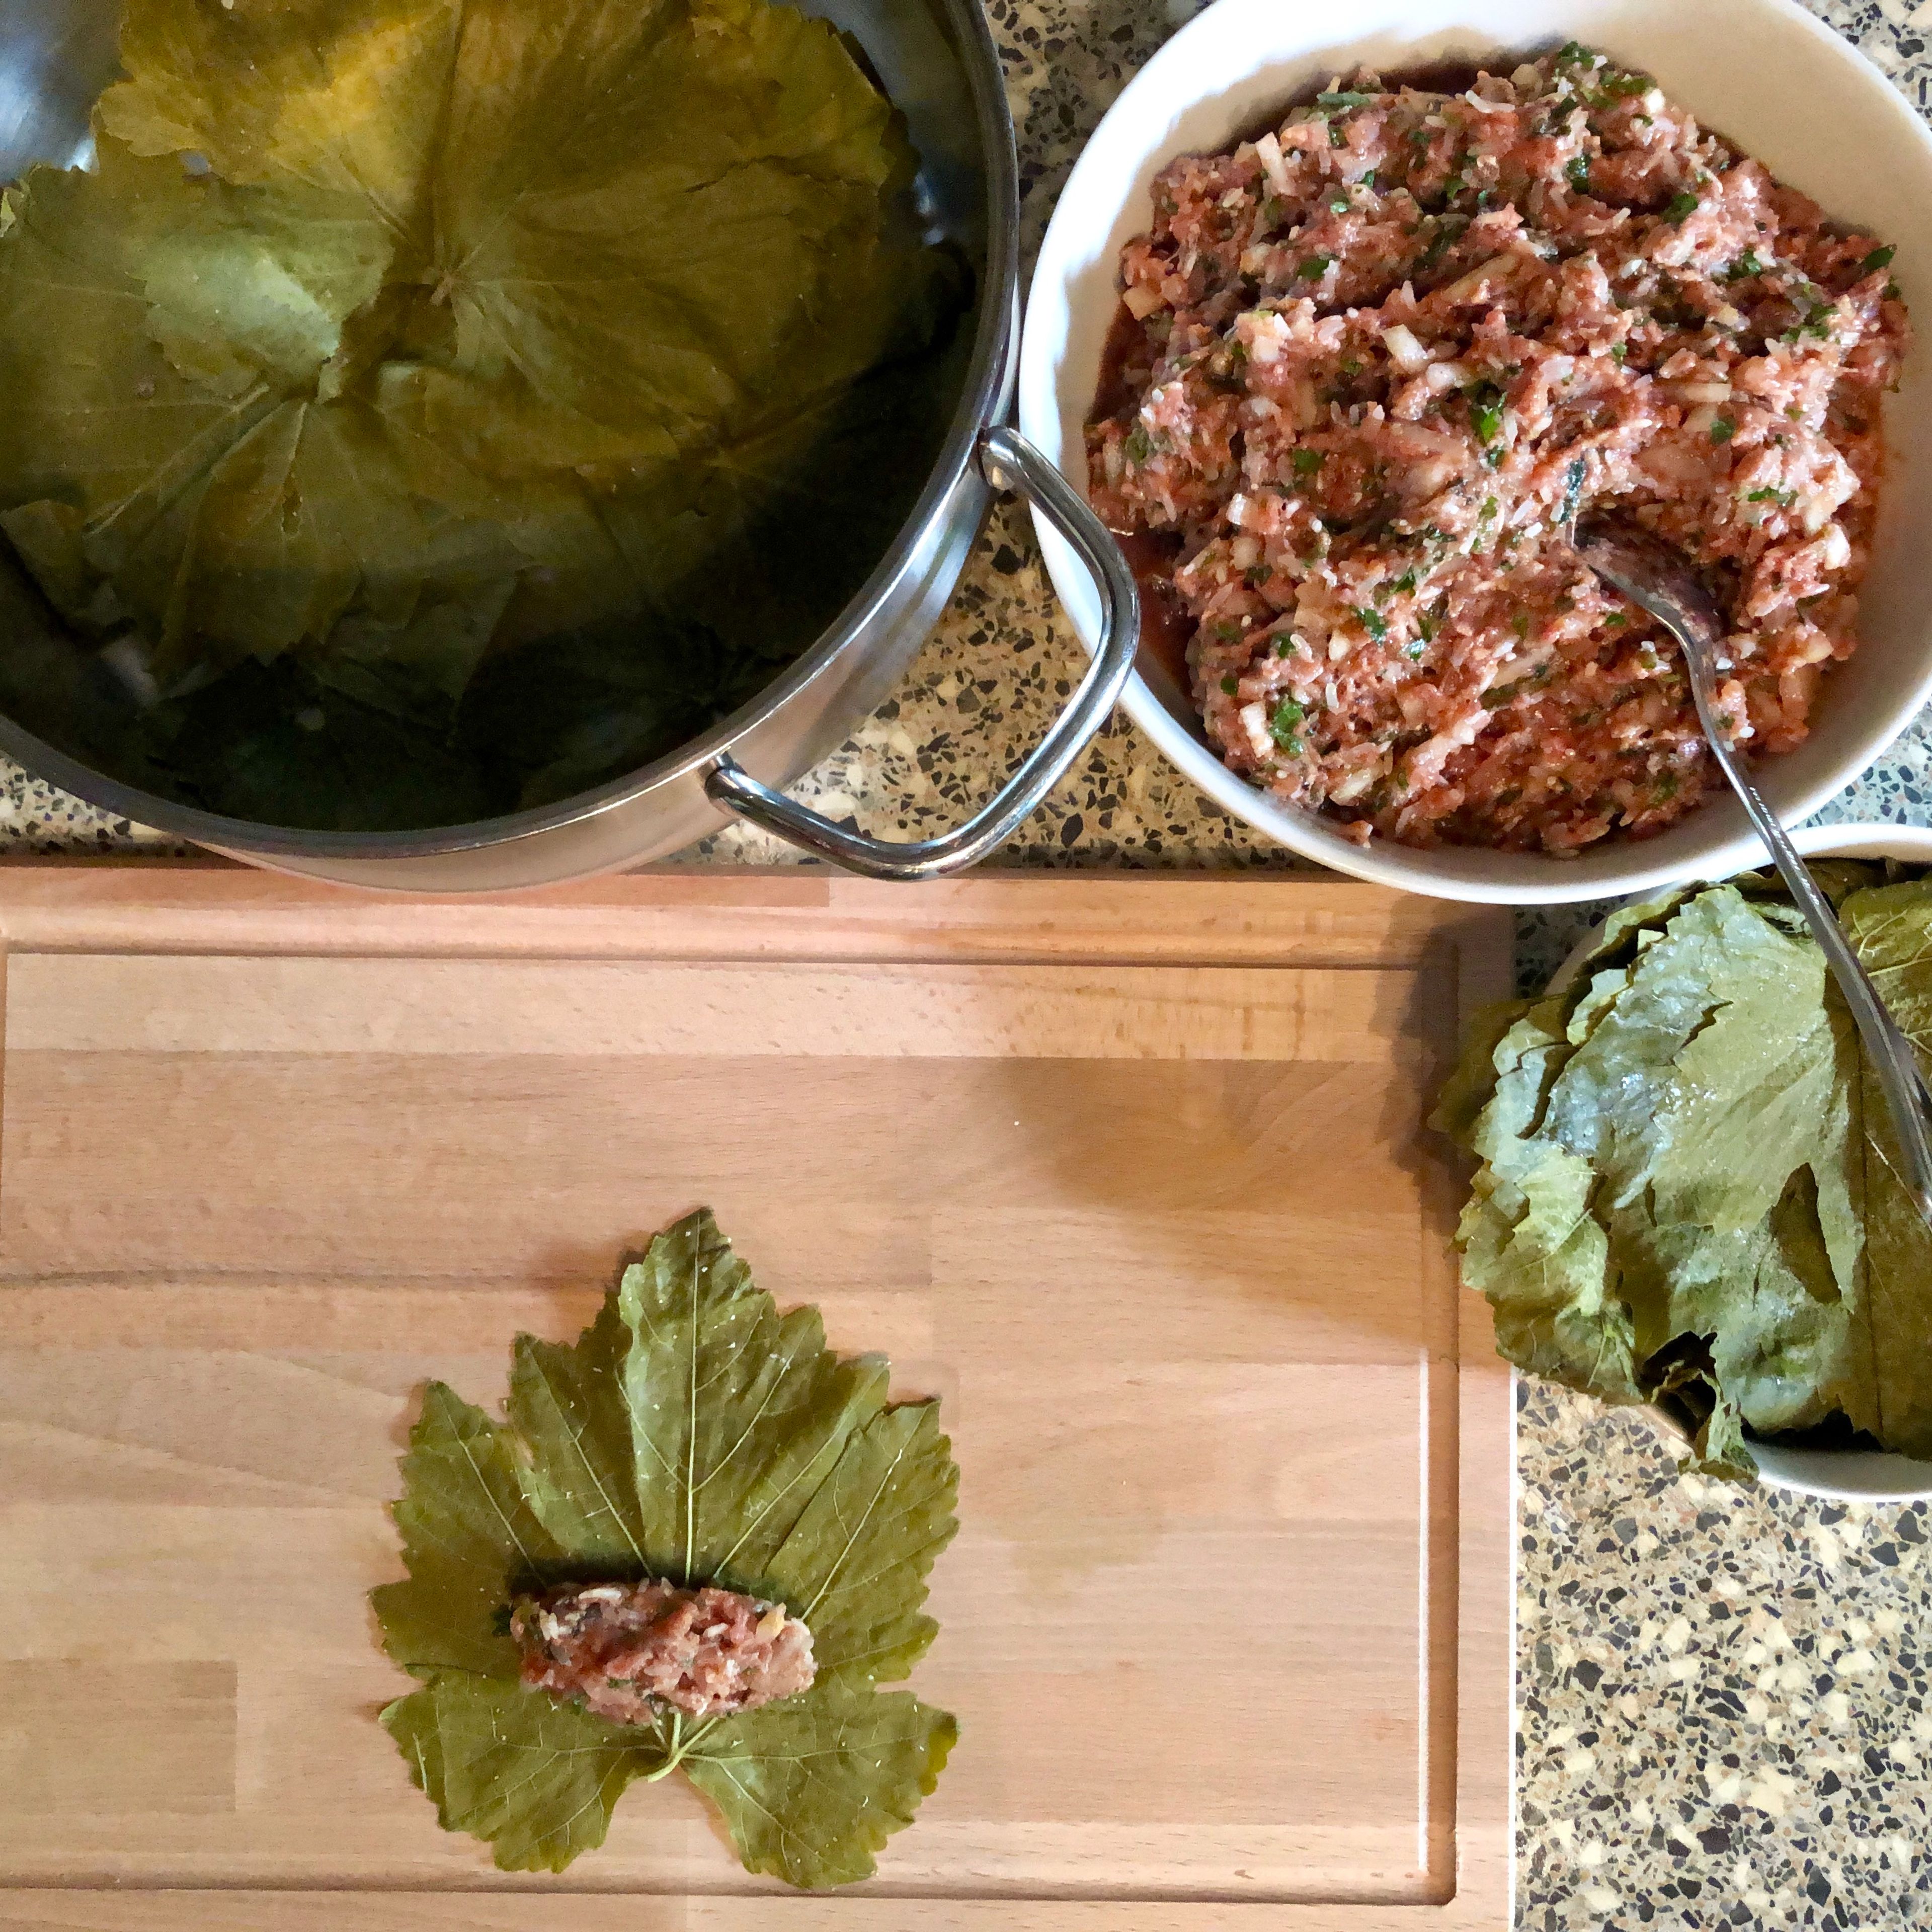 Now the fun part. Spread a leaf on a plate or cutting board, wrong side up and stem end towards you. Put a teaspoon of filling near the stem end. With your hands fold the sides and then roll up like a cigar.